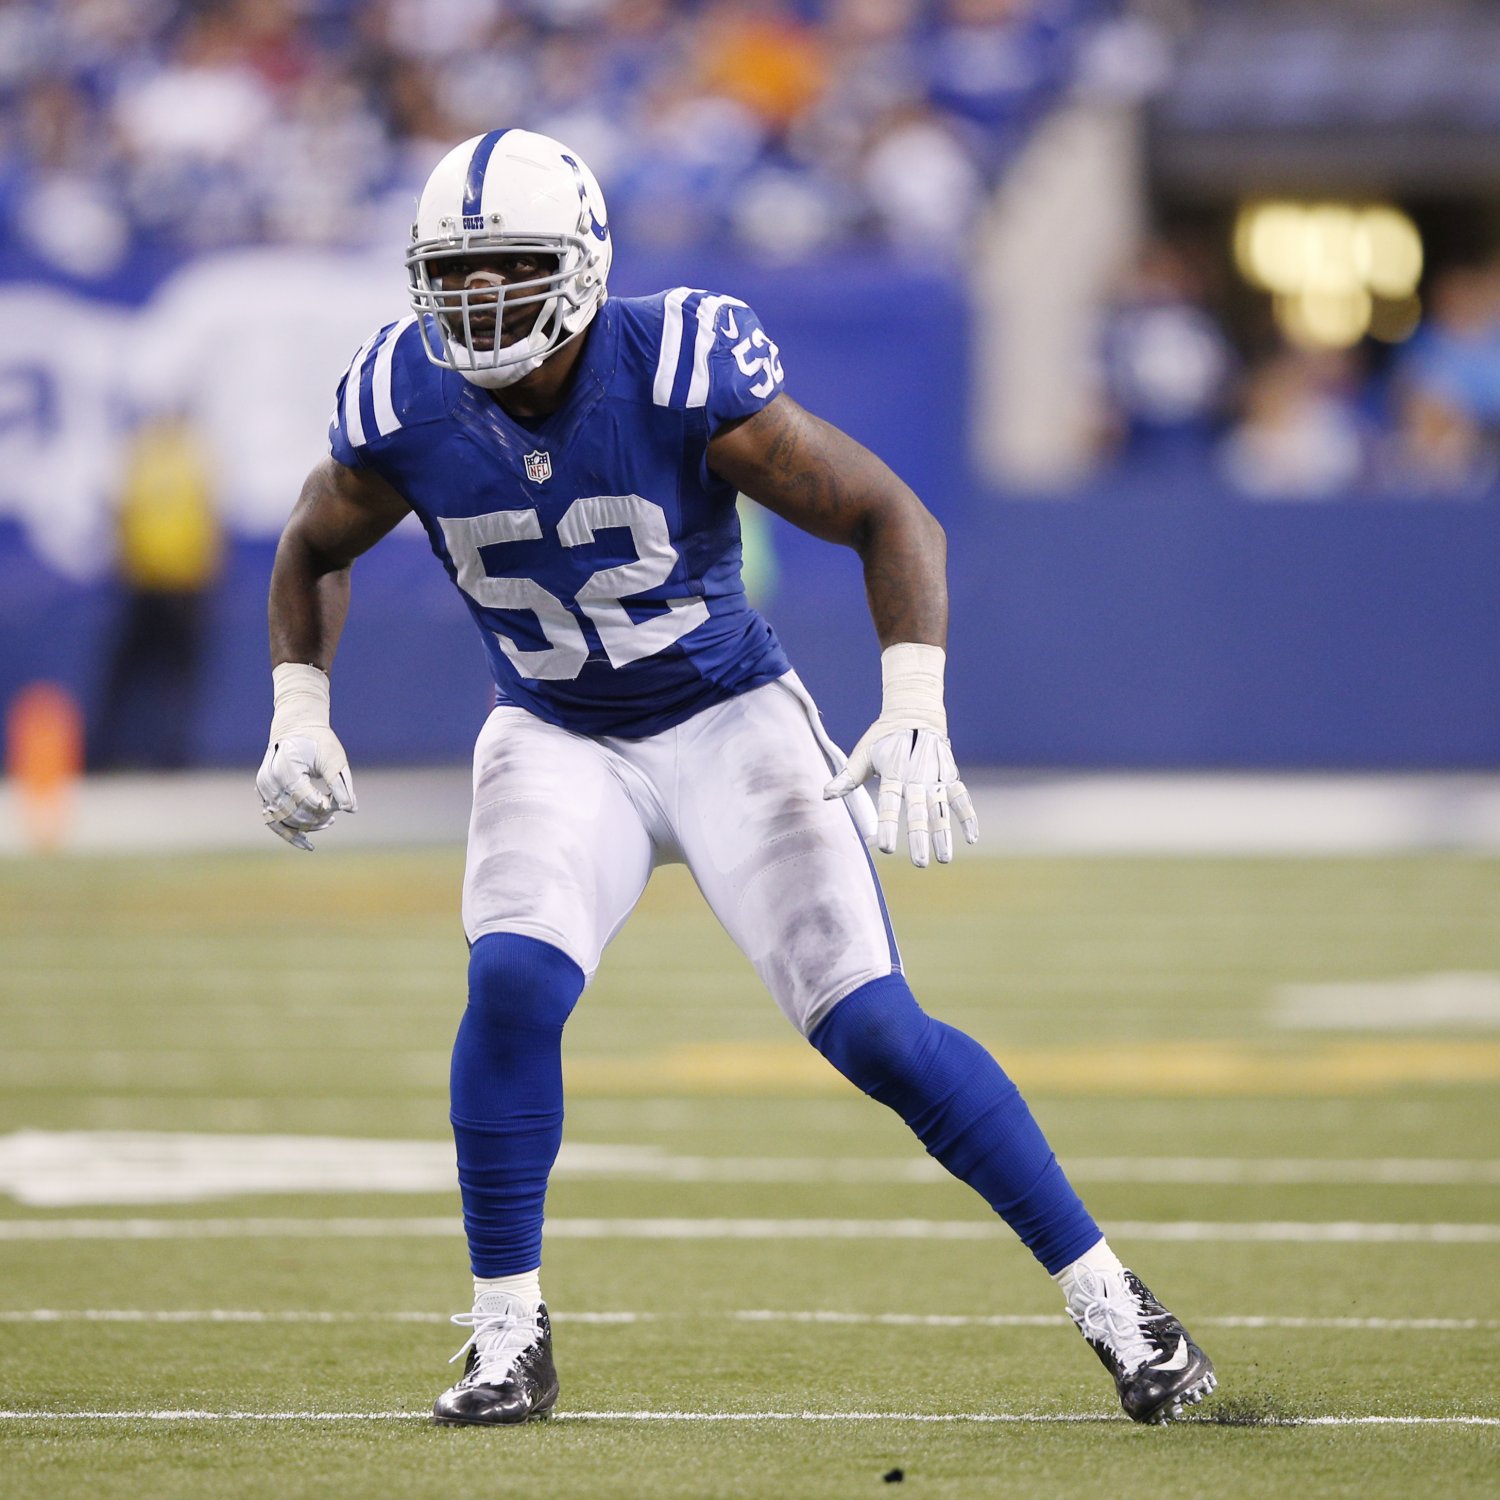 Colts LB DQwell Jackson arrested for allegedly assaulting 